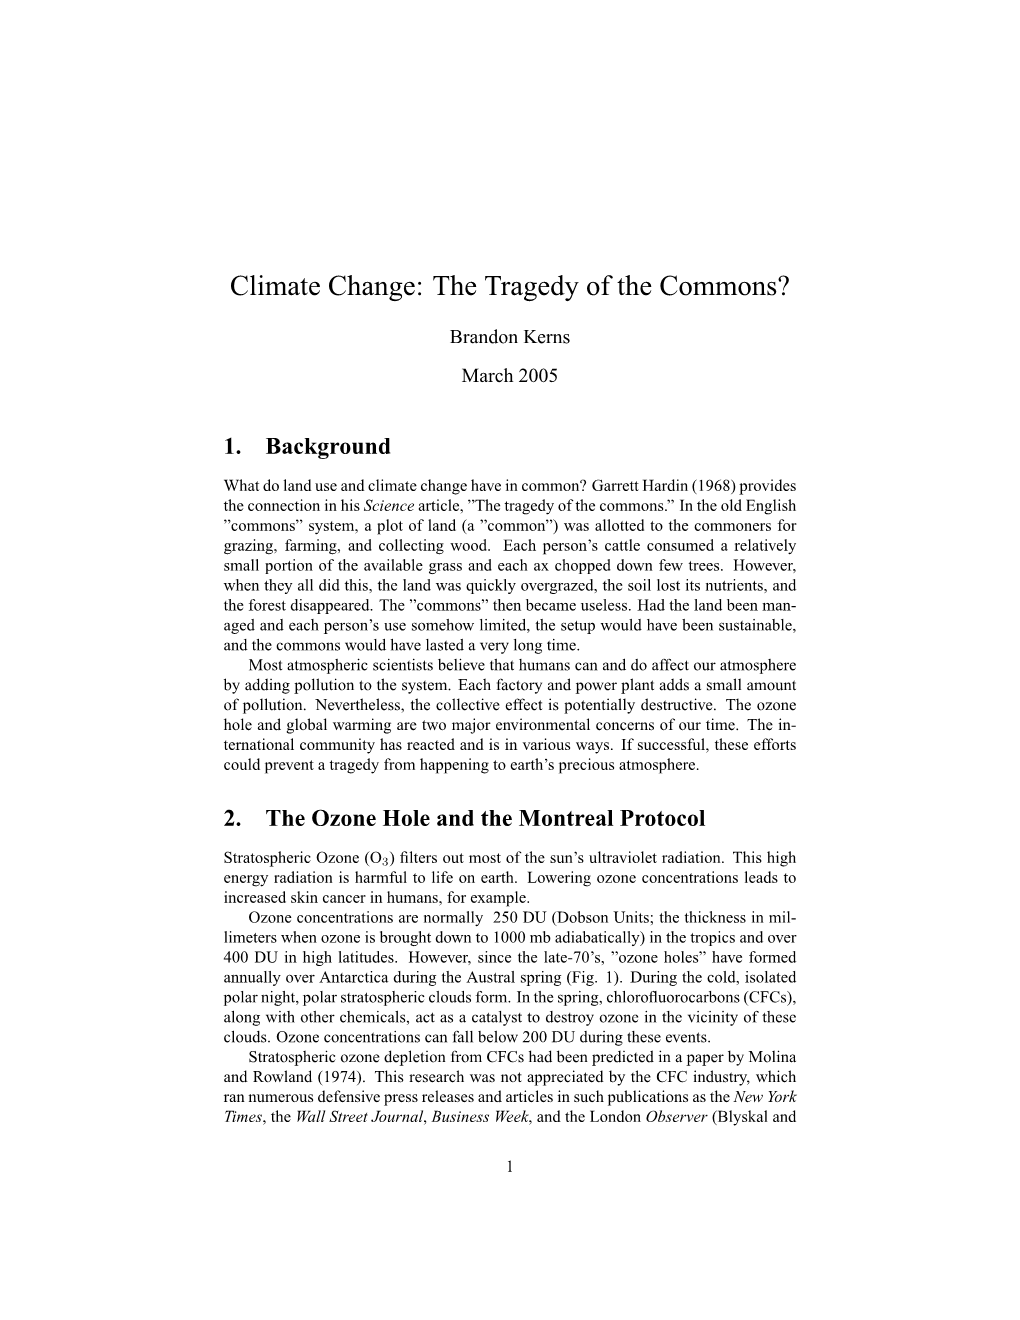 Climate Change: the Tragedy of the Commons?